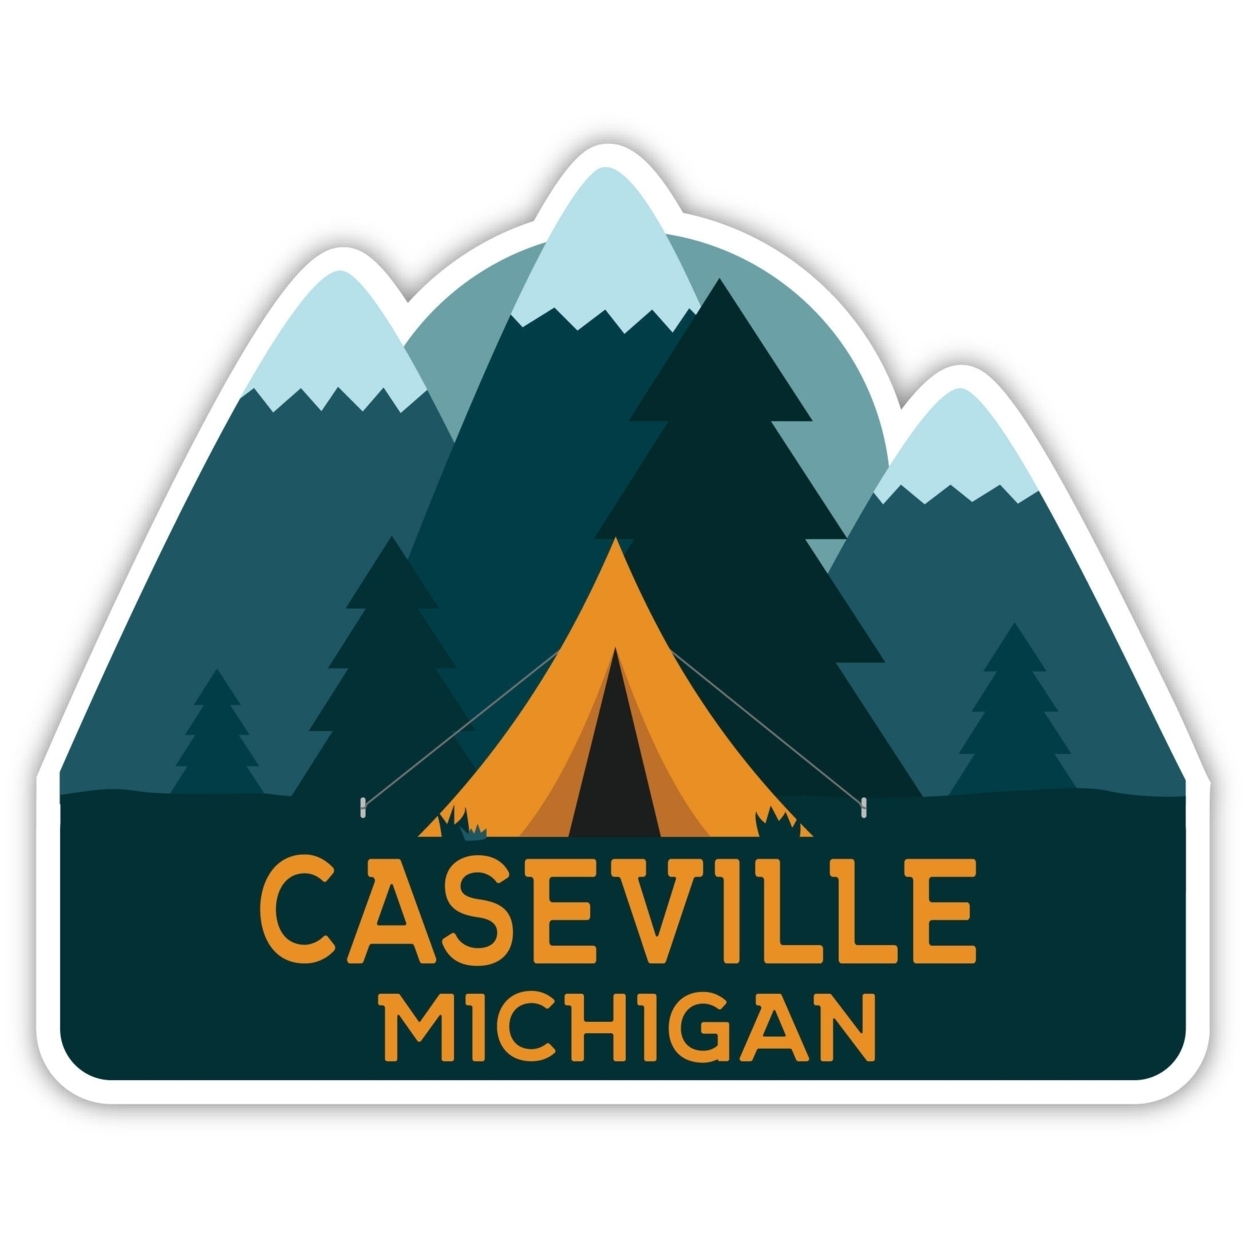 Caseville Michigan Souvenir Decorative Stickers (Choose Theme And Size) - 4-Pack, 4-Inch, Tent